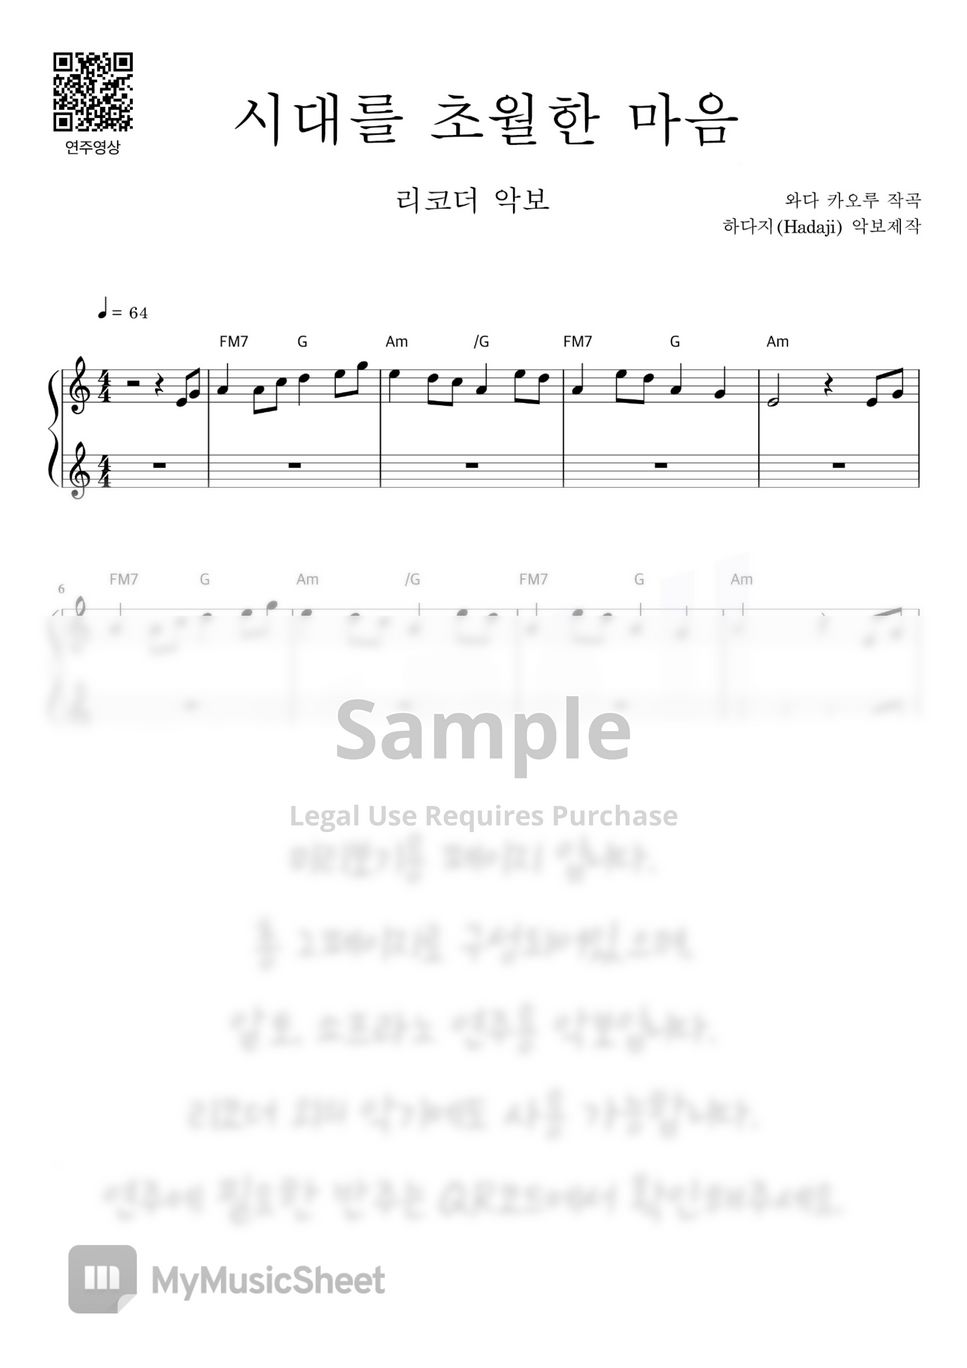 Inuyasha OST - A time lessmind (Recoder music Sheet) by hadaji